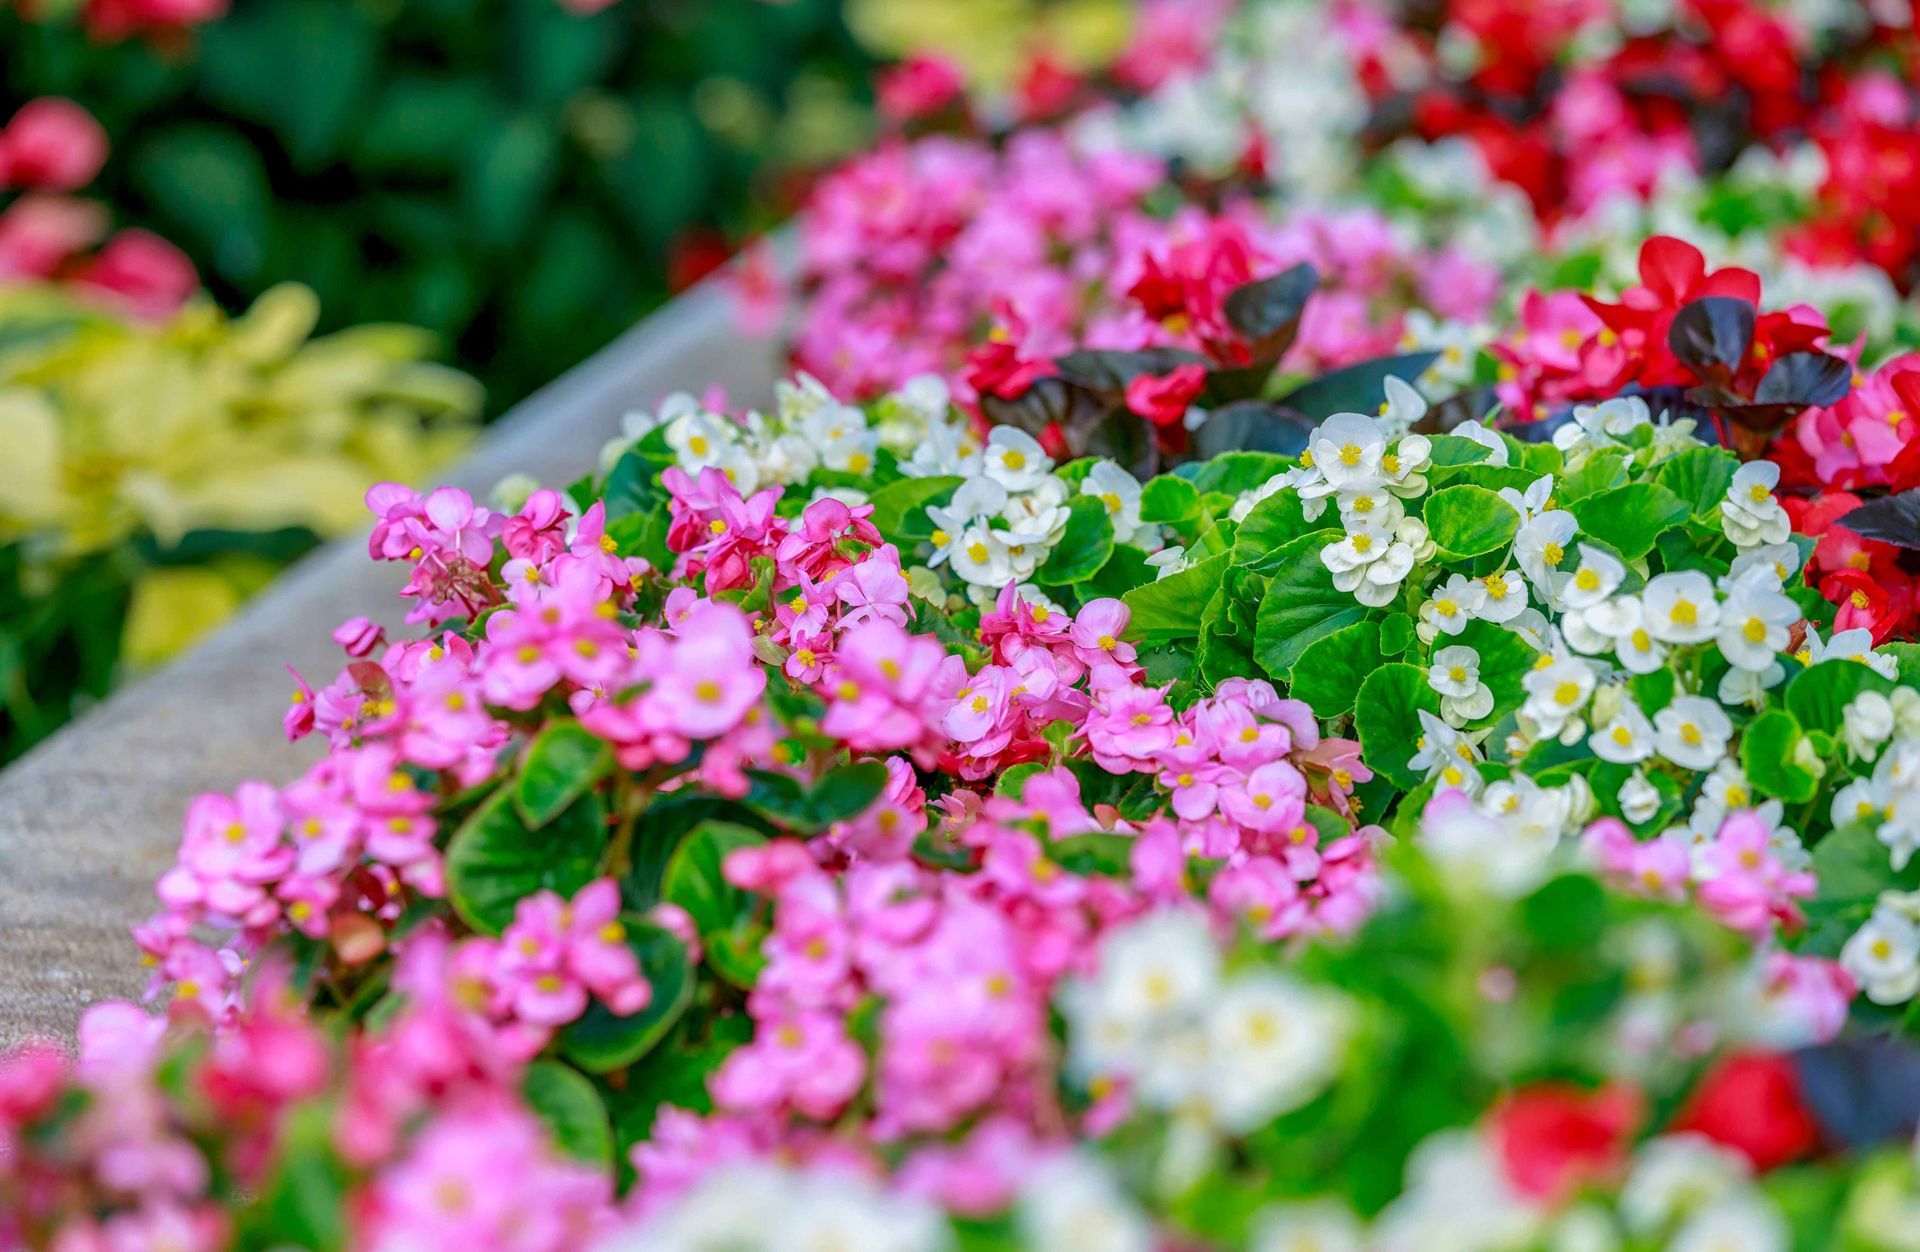 Flower beds with flowers